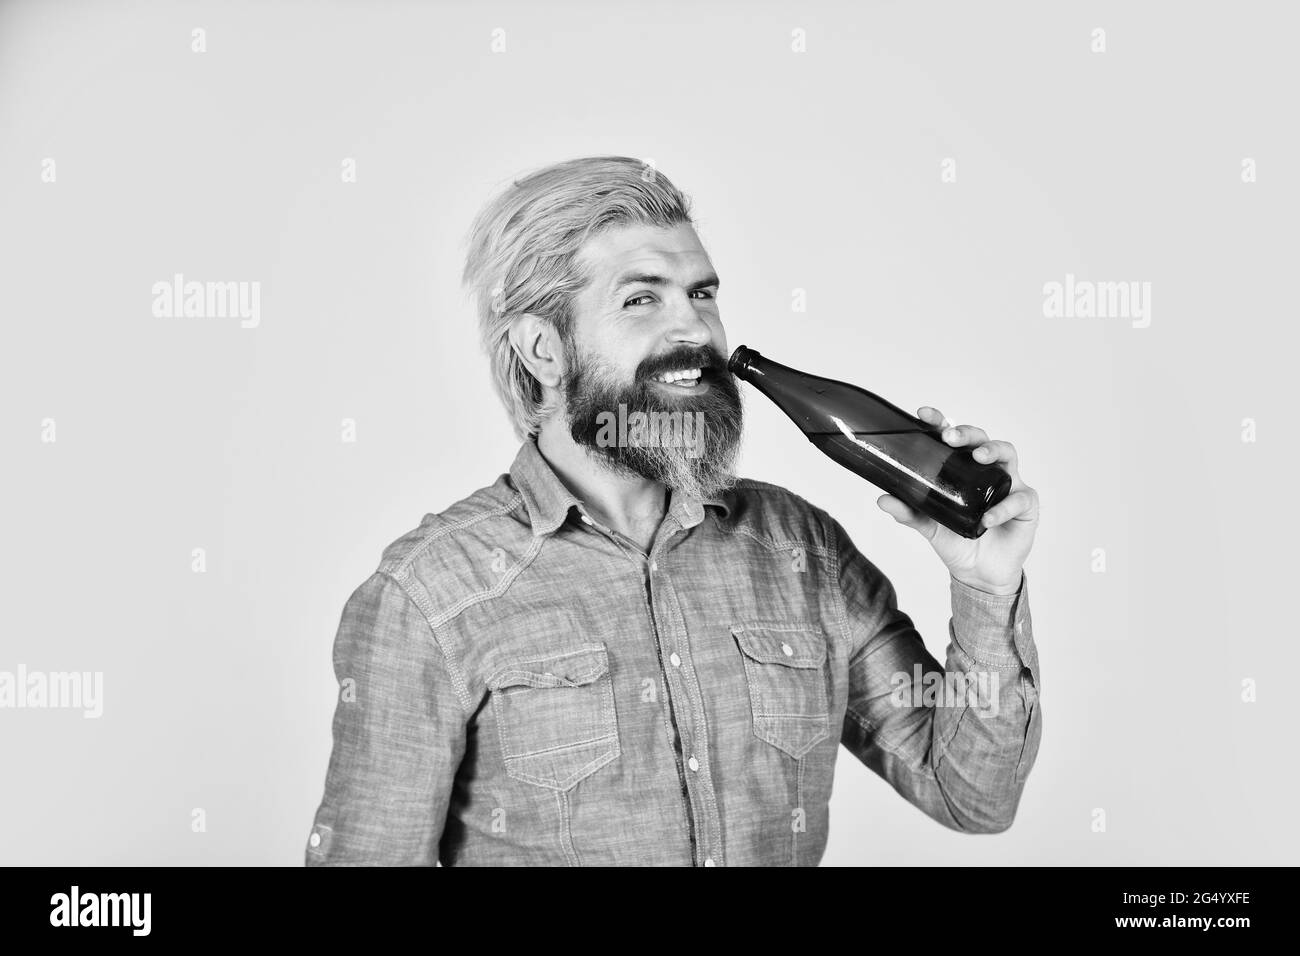 heart of Best Taste. healthy water in glass bottle. brutal hipster drinking alcohol beverage. beer and football. relax after work day. lets have fun Stock Photo